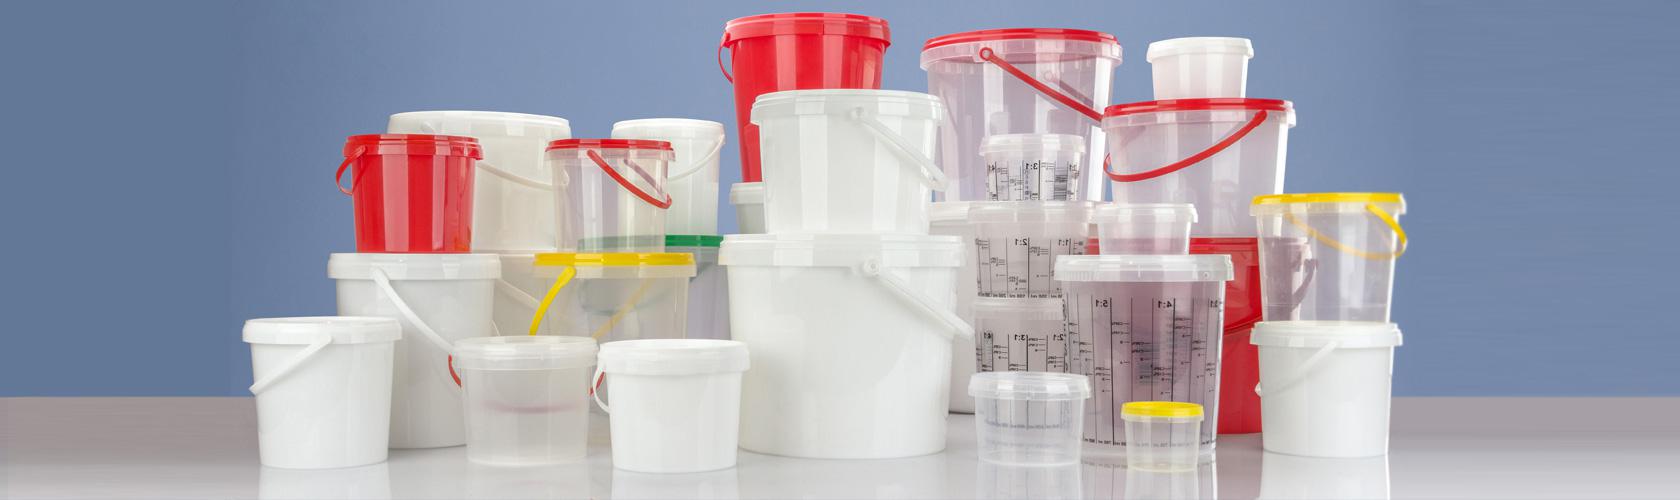 DDS plast Multi color containers